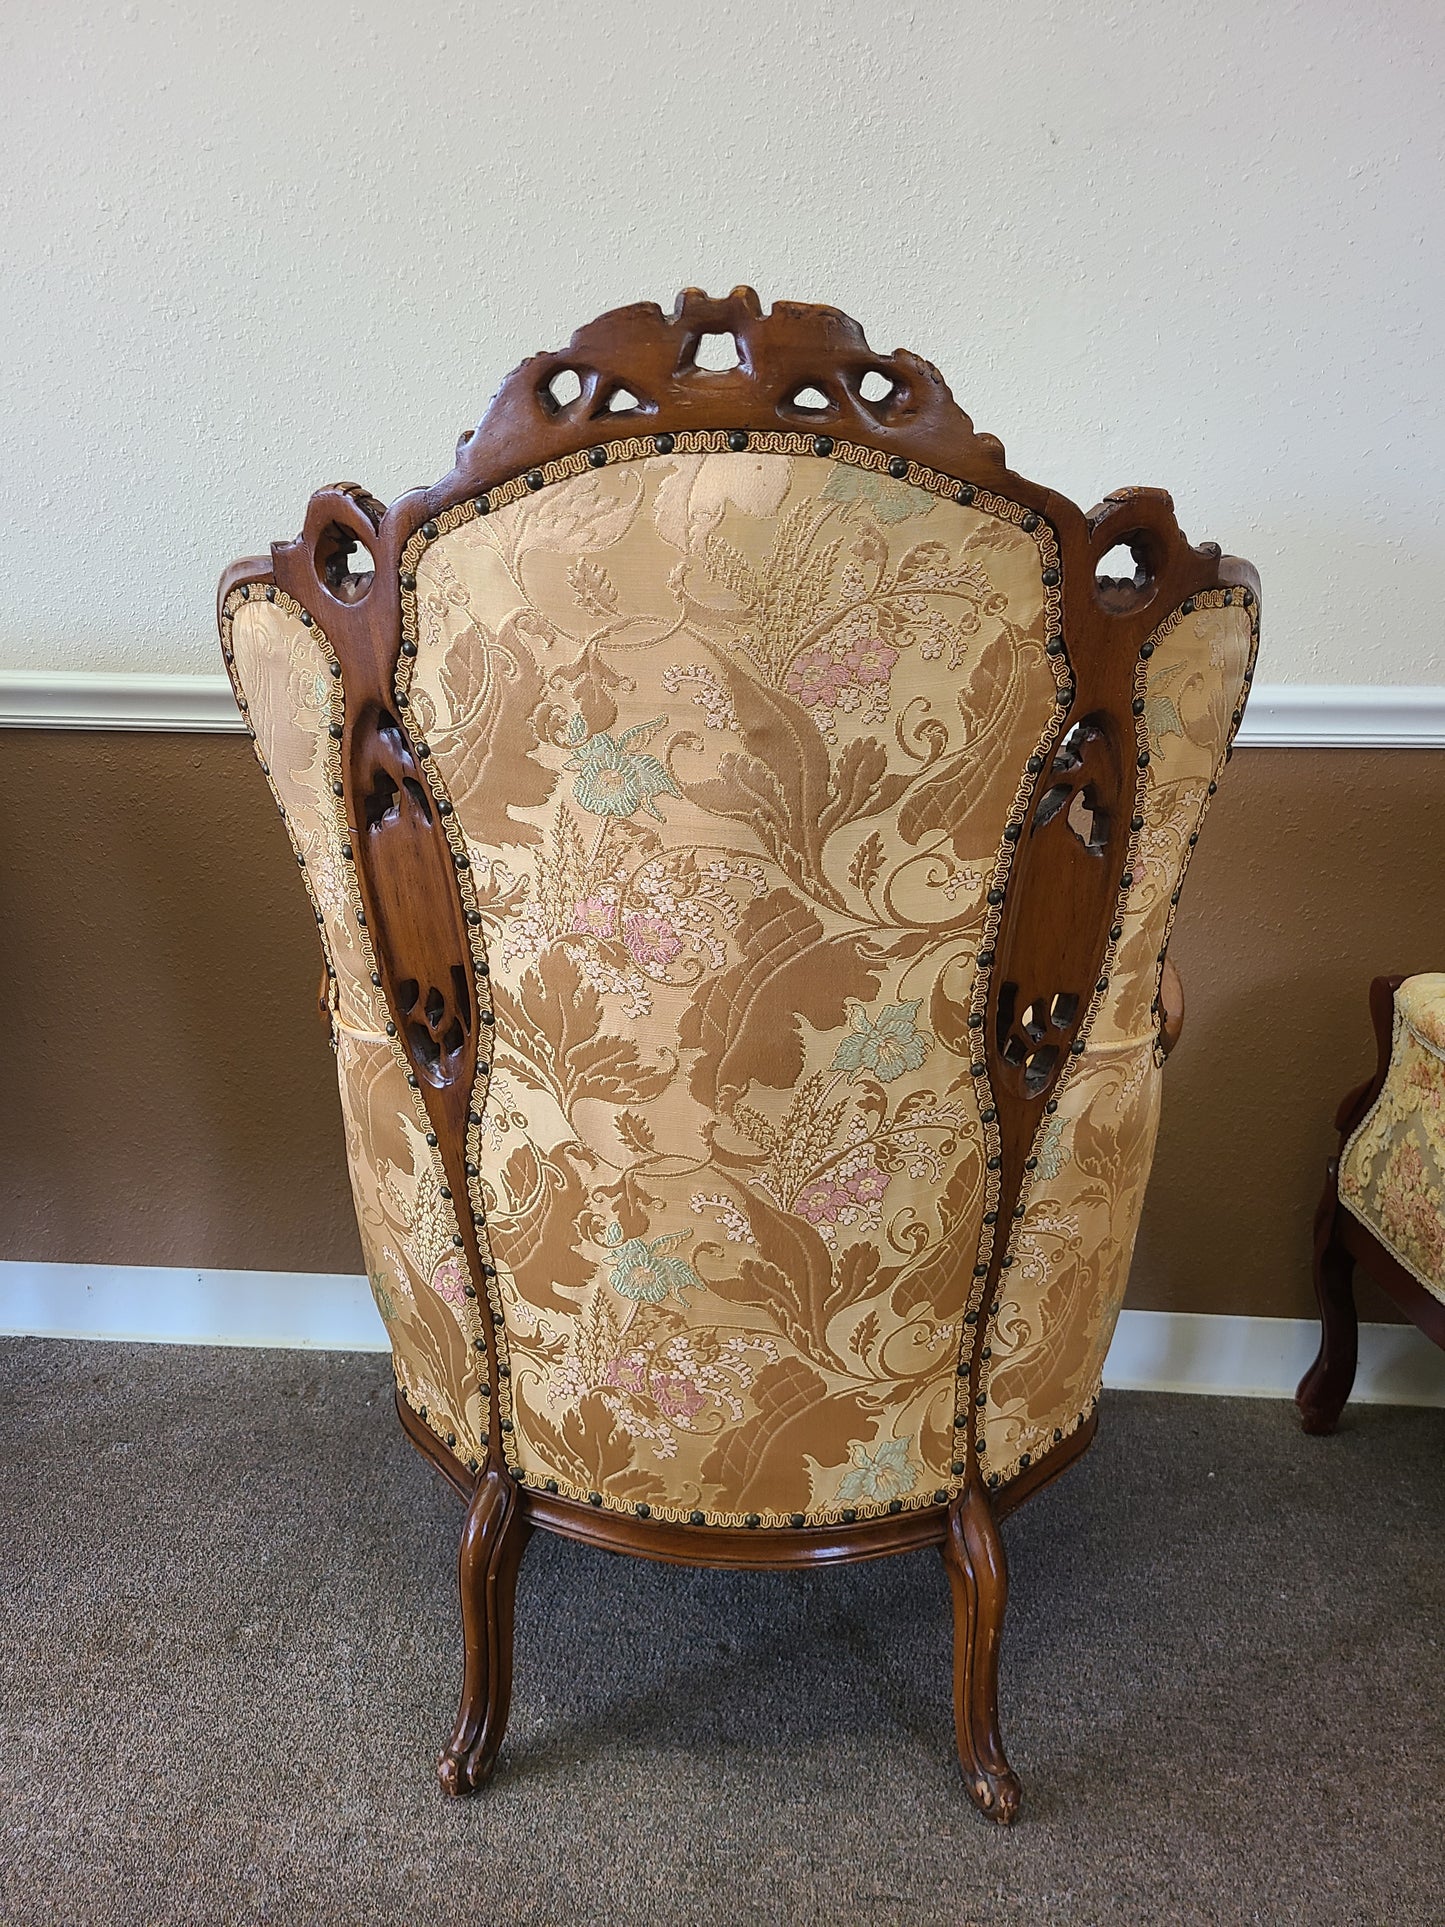 Exqusite Victorian Antique Occasional Chair - AVAILABLE